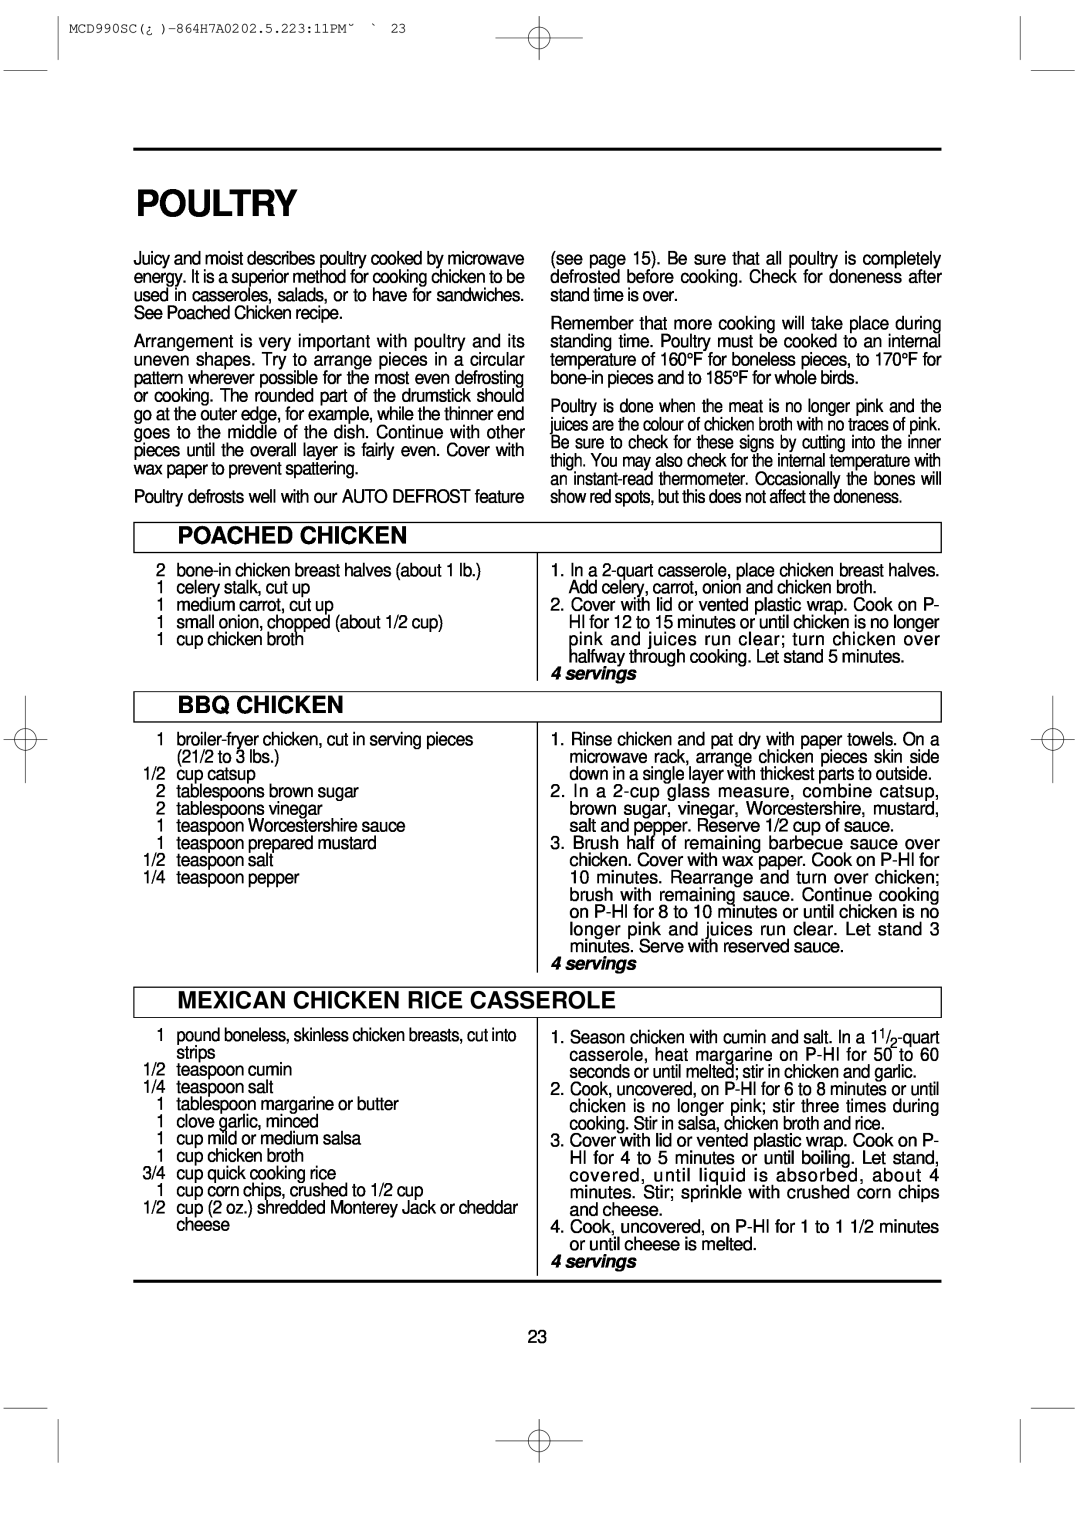 Magic Chef MCD990SC instruction manual Poultry, Poached Chicken, Bbq Chicken, Mexican Chicken Rice Casserole, servings 